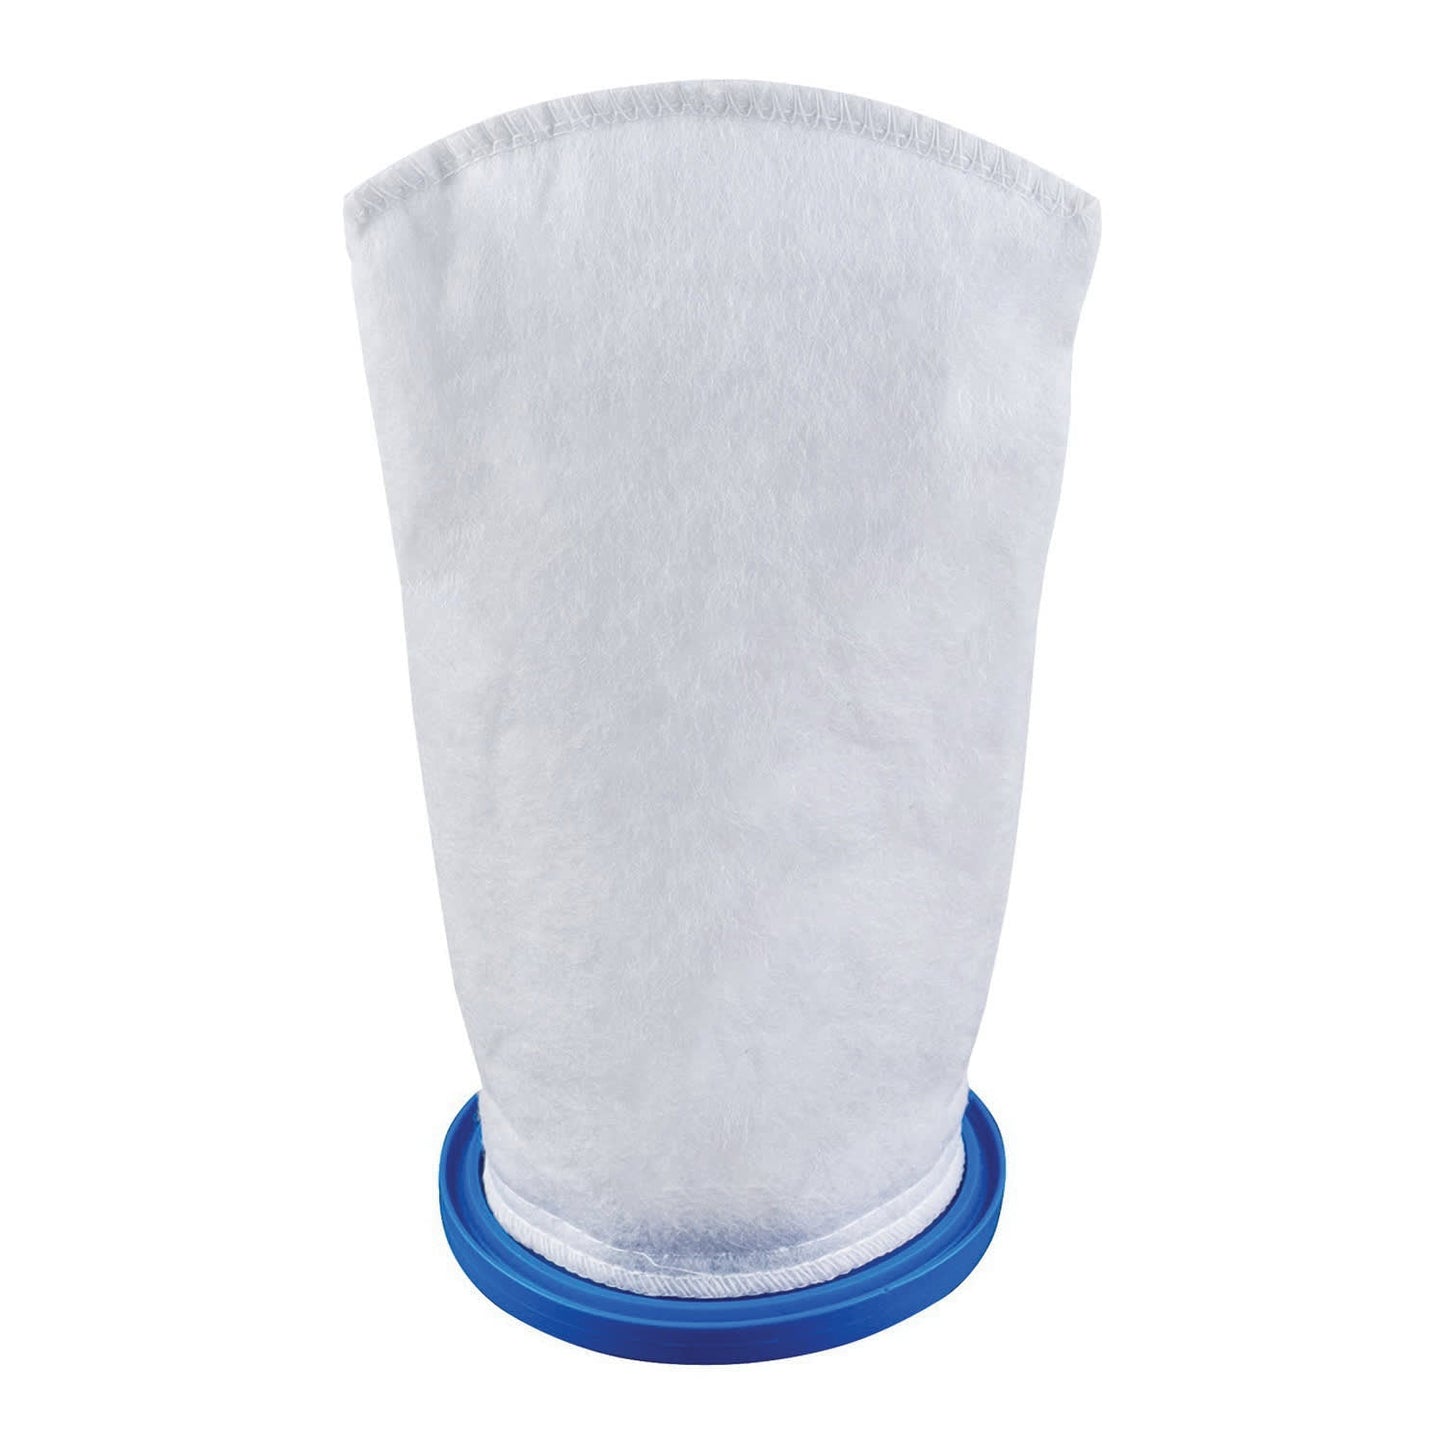 Water Tech X-Treme Multilayer Filter Bag for Pool Vacuums | P32X022XF